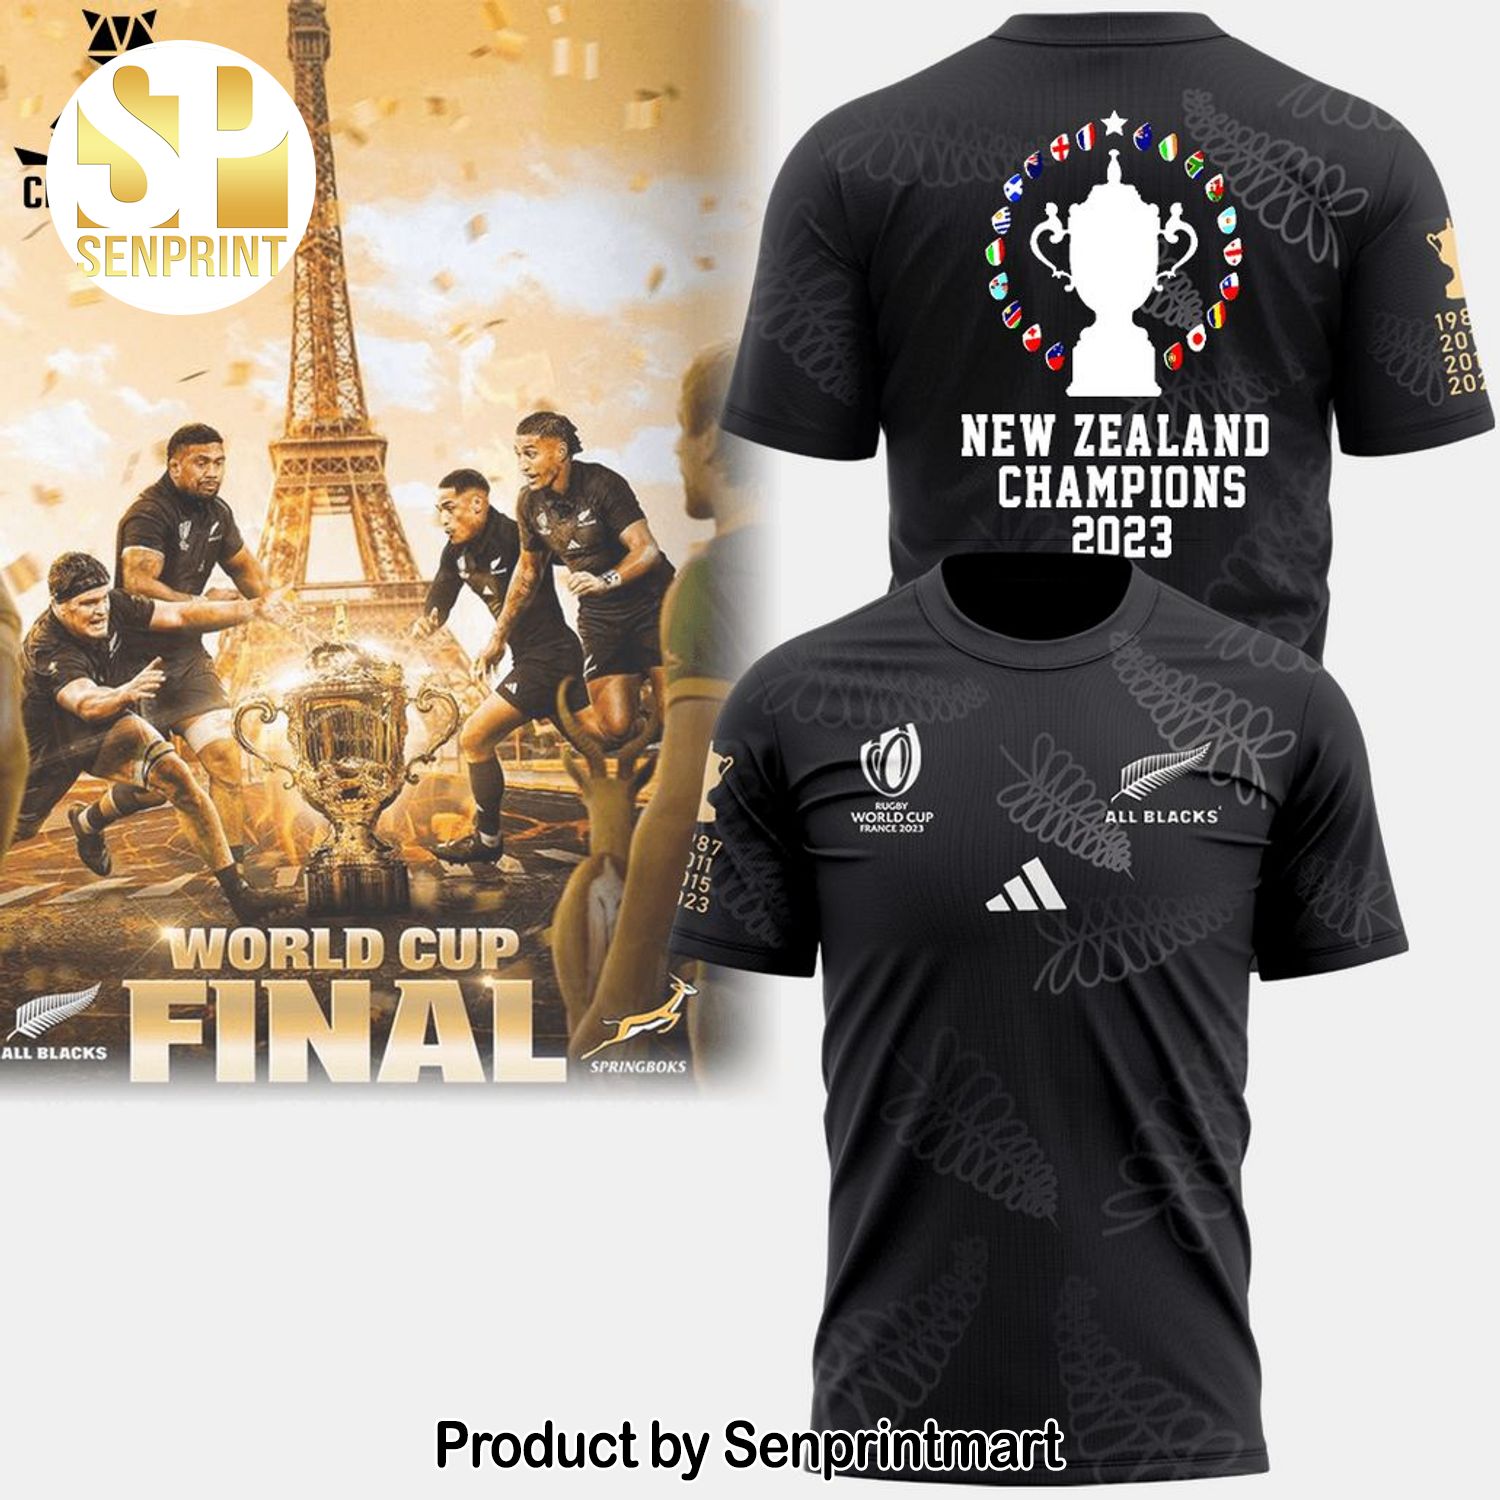 Up The All Blacks New Zealand Rugby Worldcup France 2023 3D Full Print Shirt